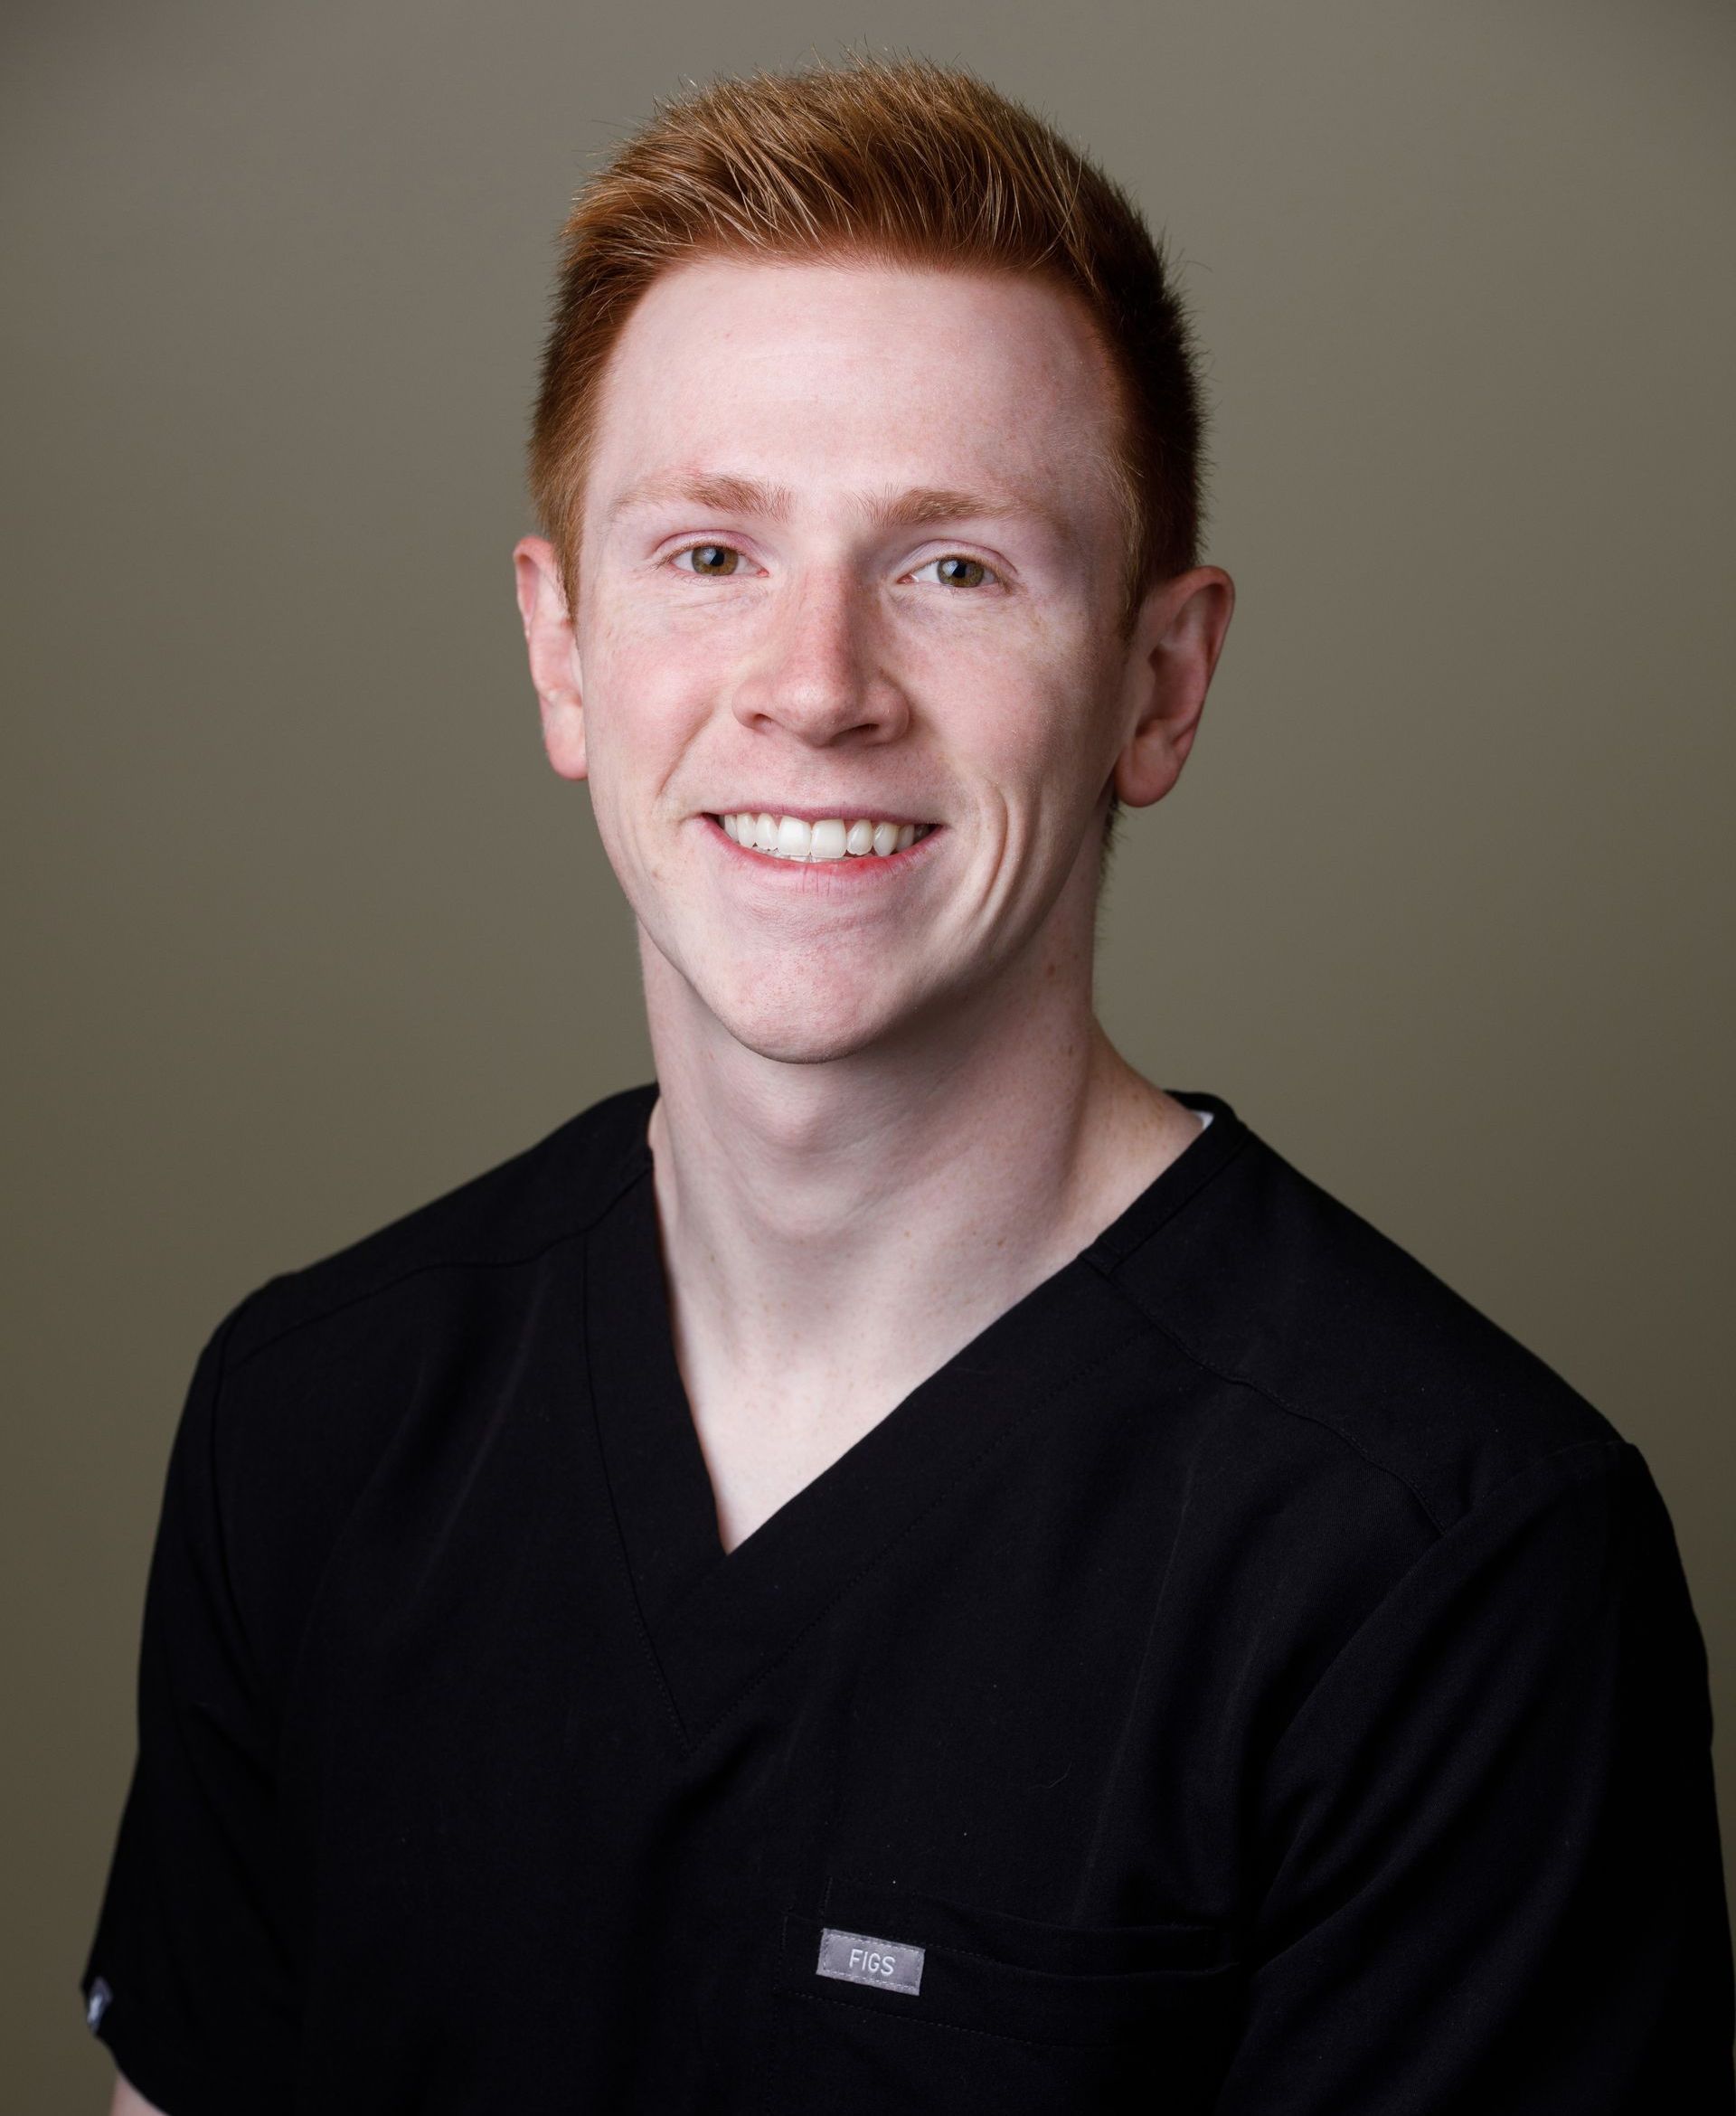 Dr. Caleb Murry Proudly Works for Georgetown Dental in Columbia, Missouri.